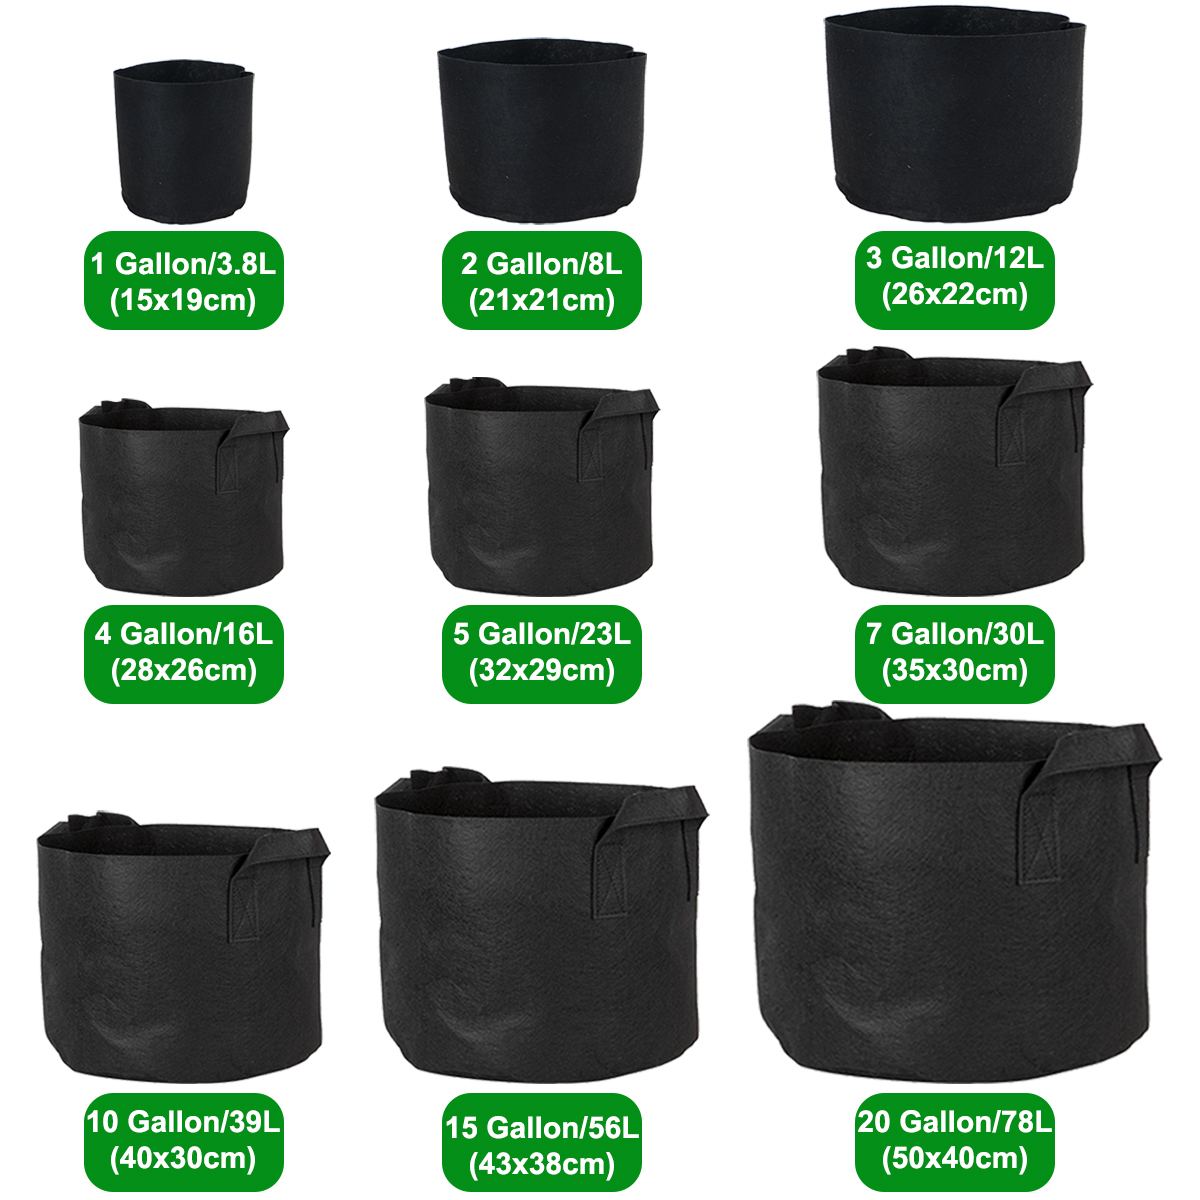 Non-woven-Fabric-Planting-Grow-Box-Vegetable-Flower-Pots-Bag-Planter-Black-with-Handles-1678096-3